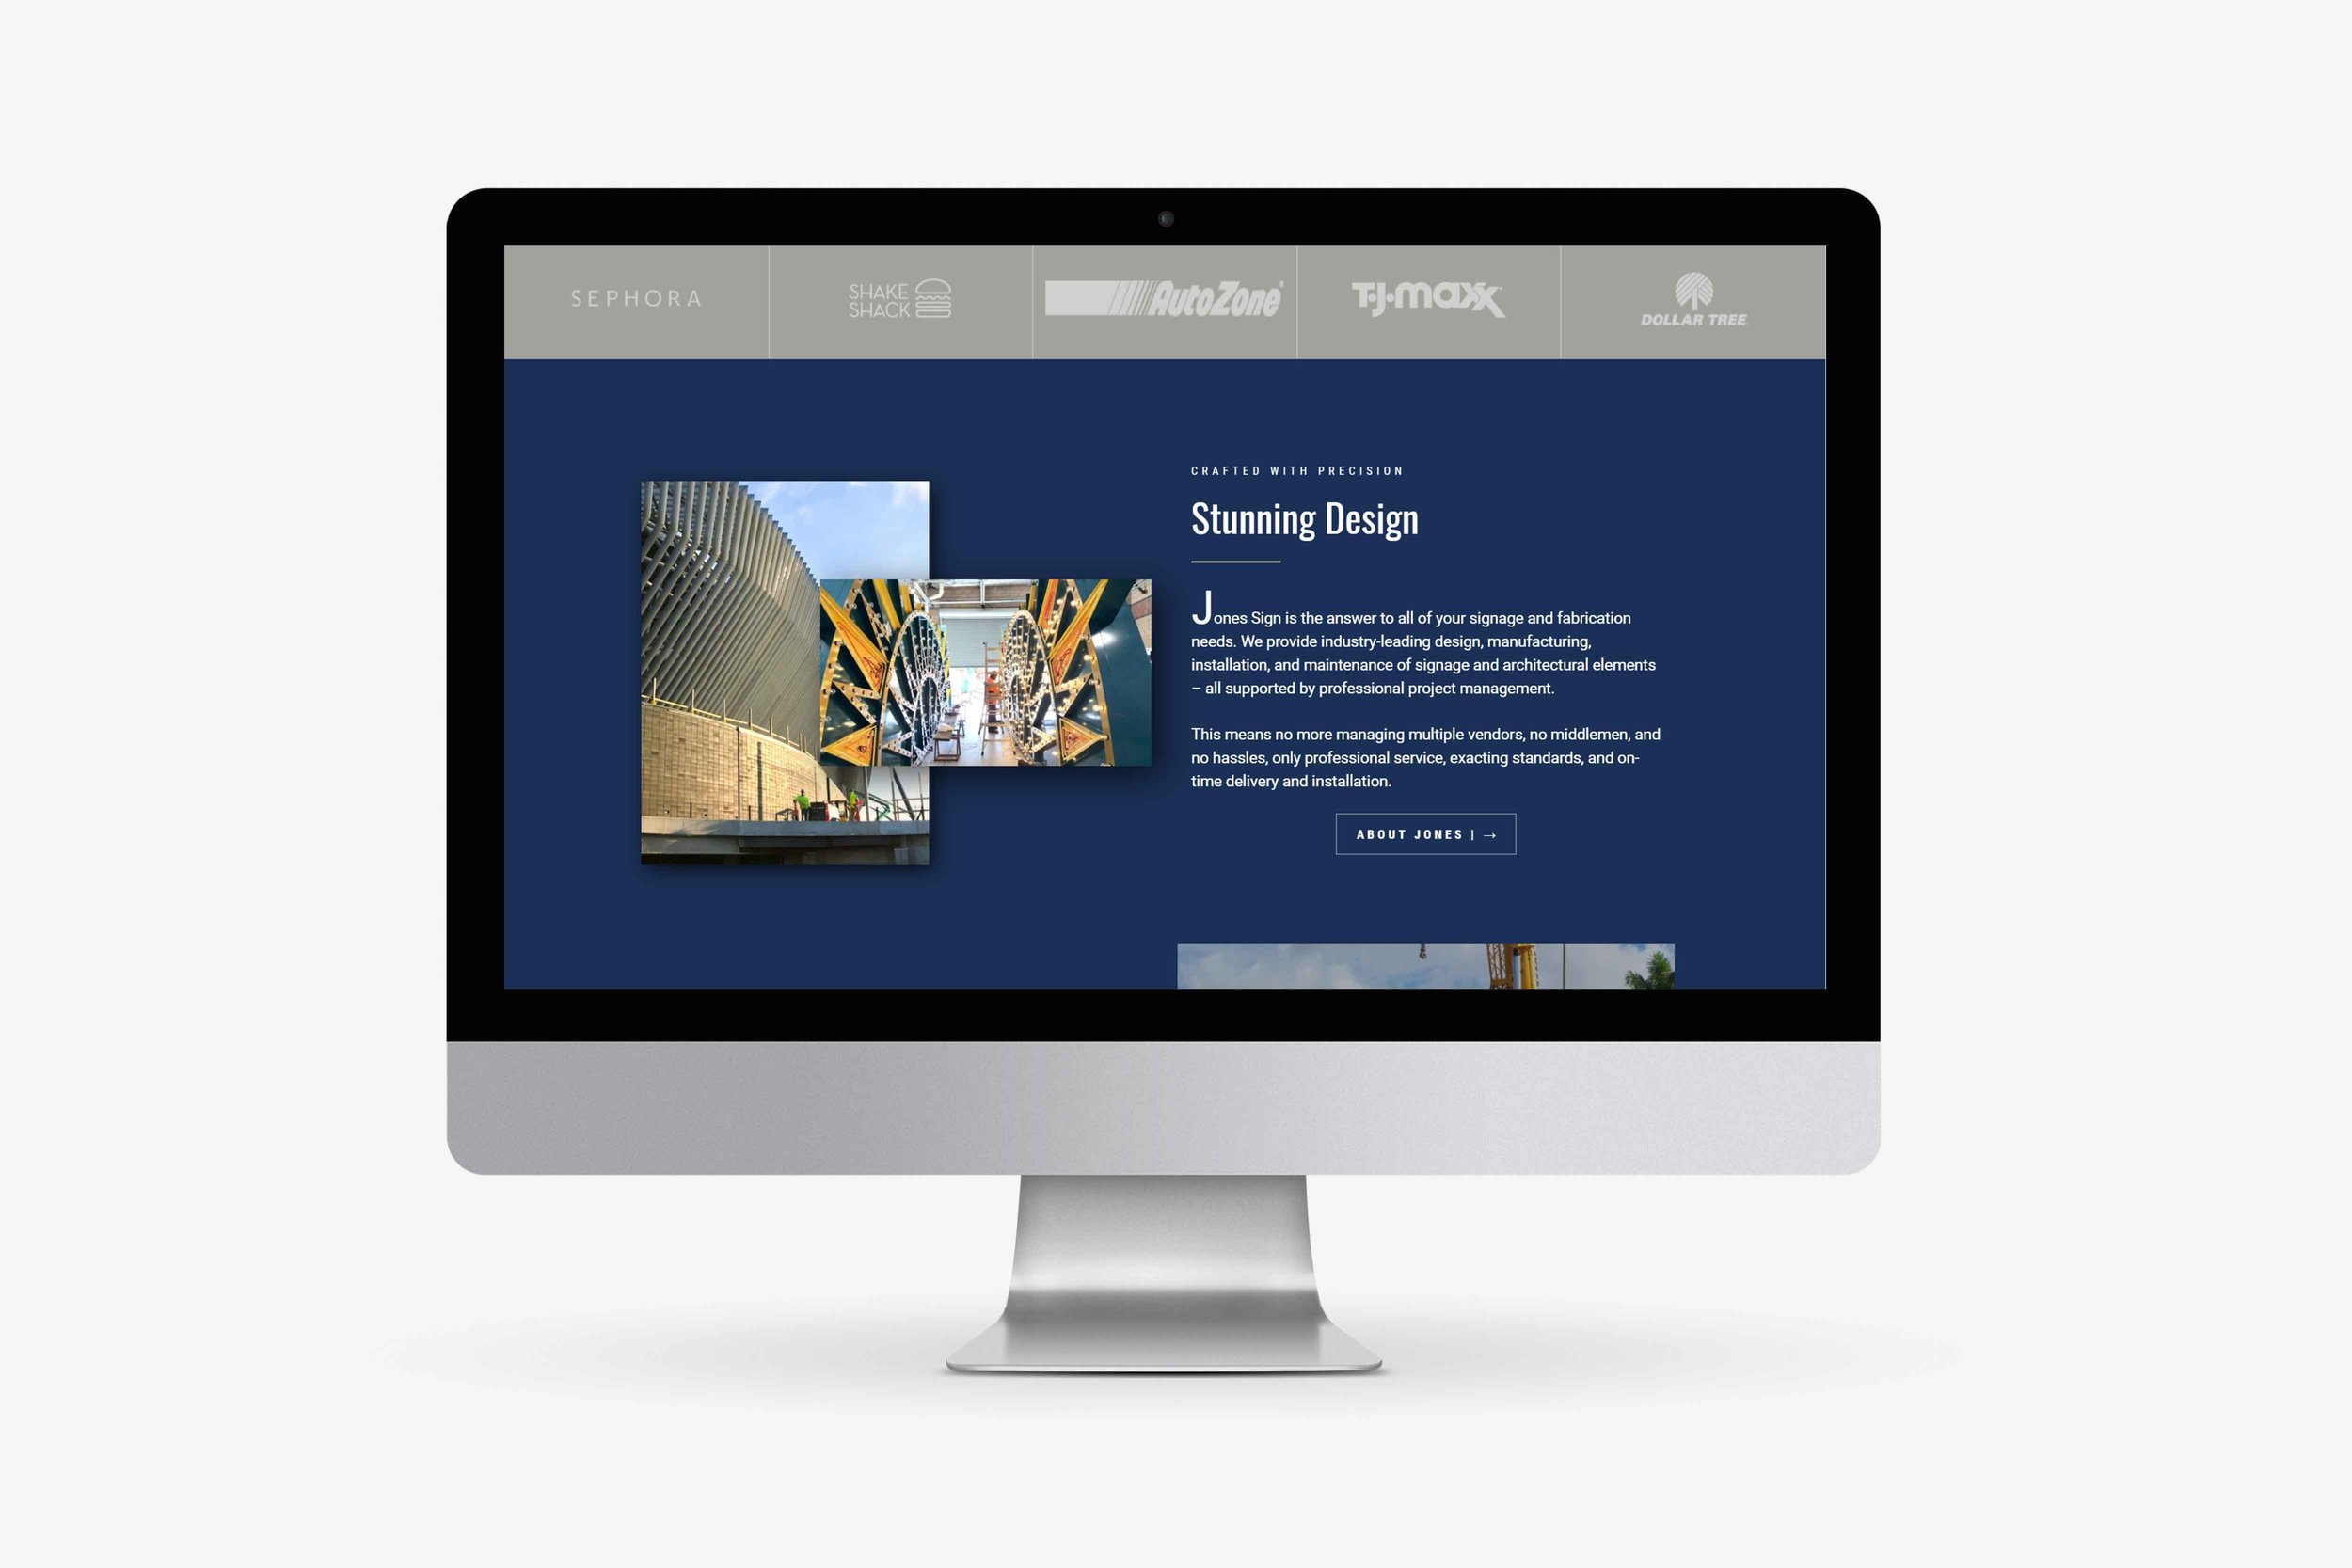 HeiPro Digital: web design and branding services